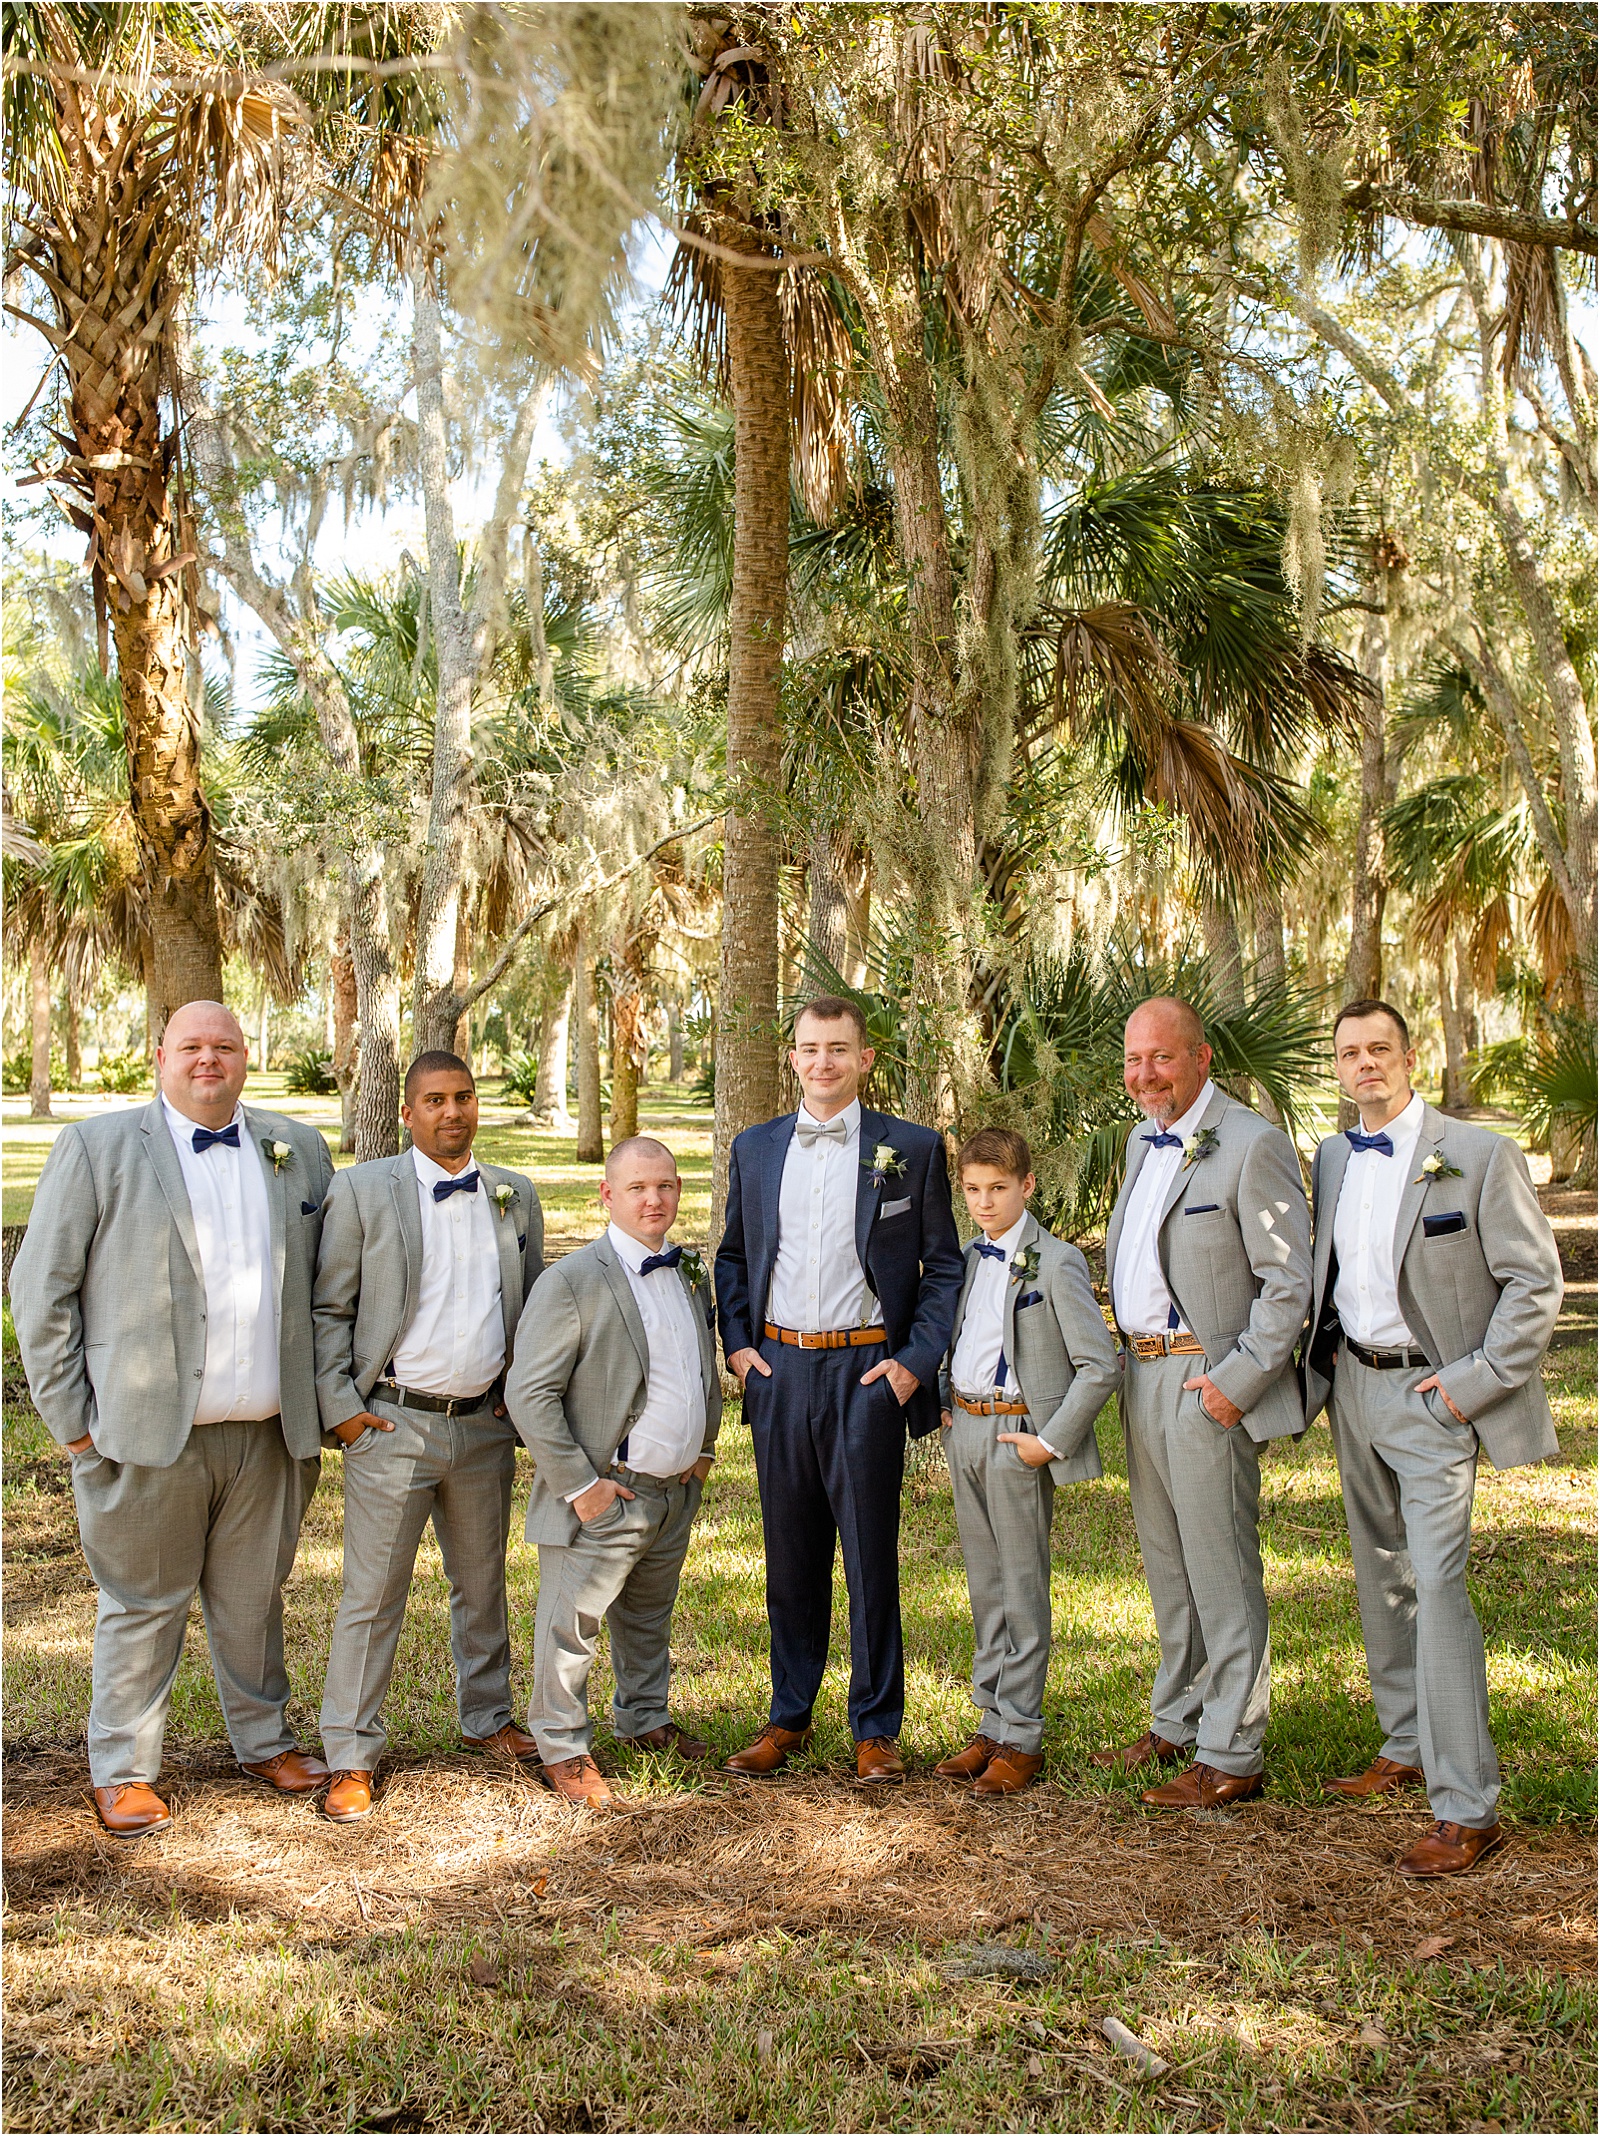 Groom and friends pose before wedding